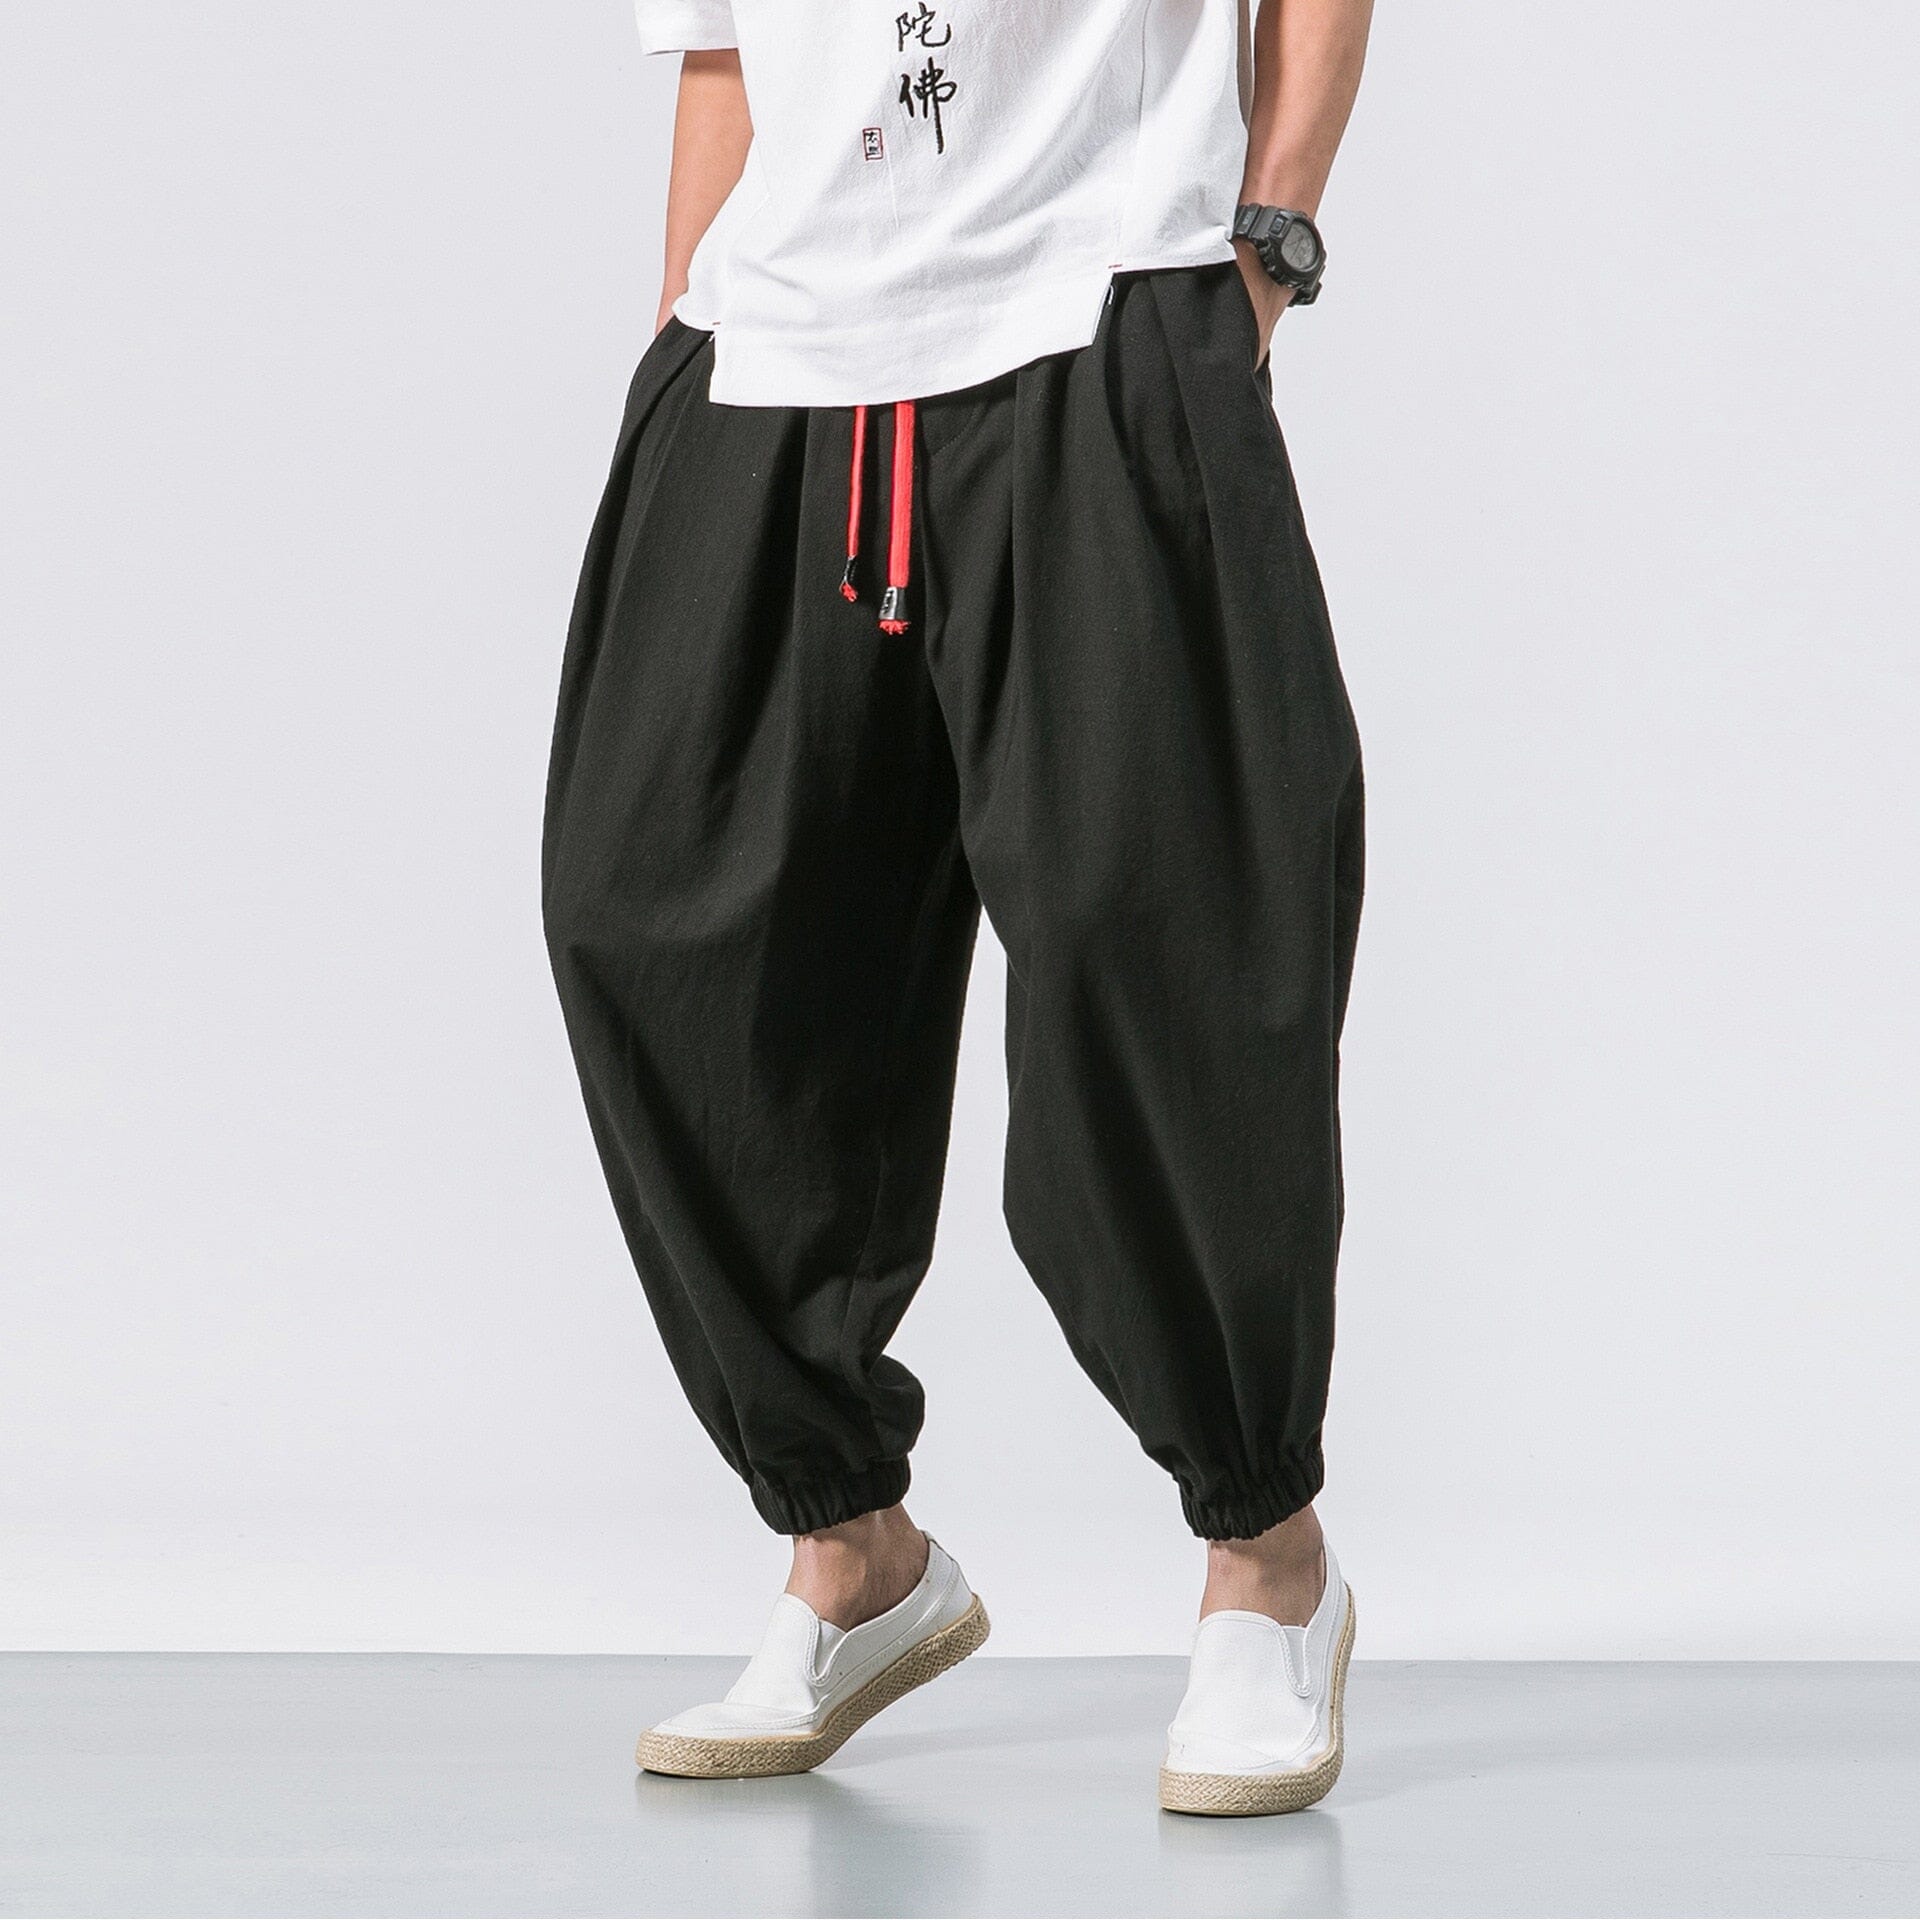 FGKKS Spring Men Loose Harem Pants Chinese Linen Overweight Sweatpants High Quality Casual Brand Oversize Trousers Male 0 GatoGeek Black Asian Size XXXL 